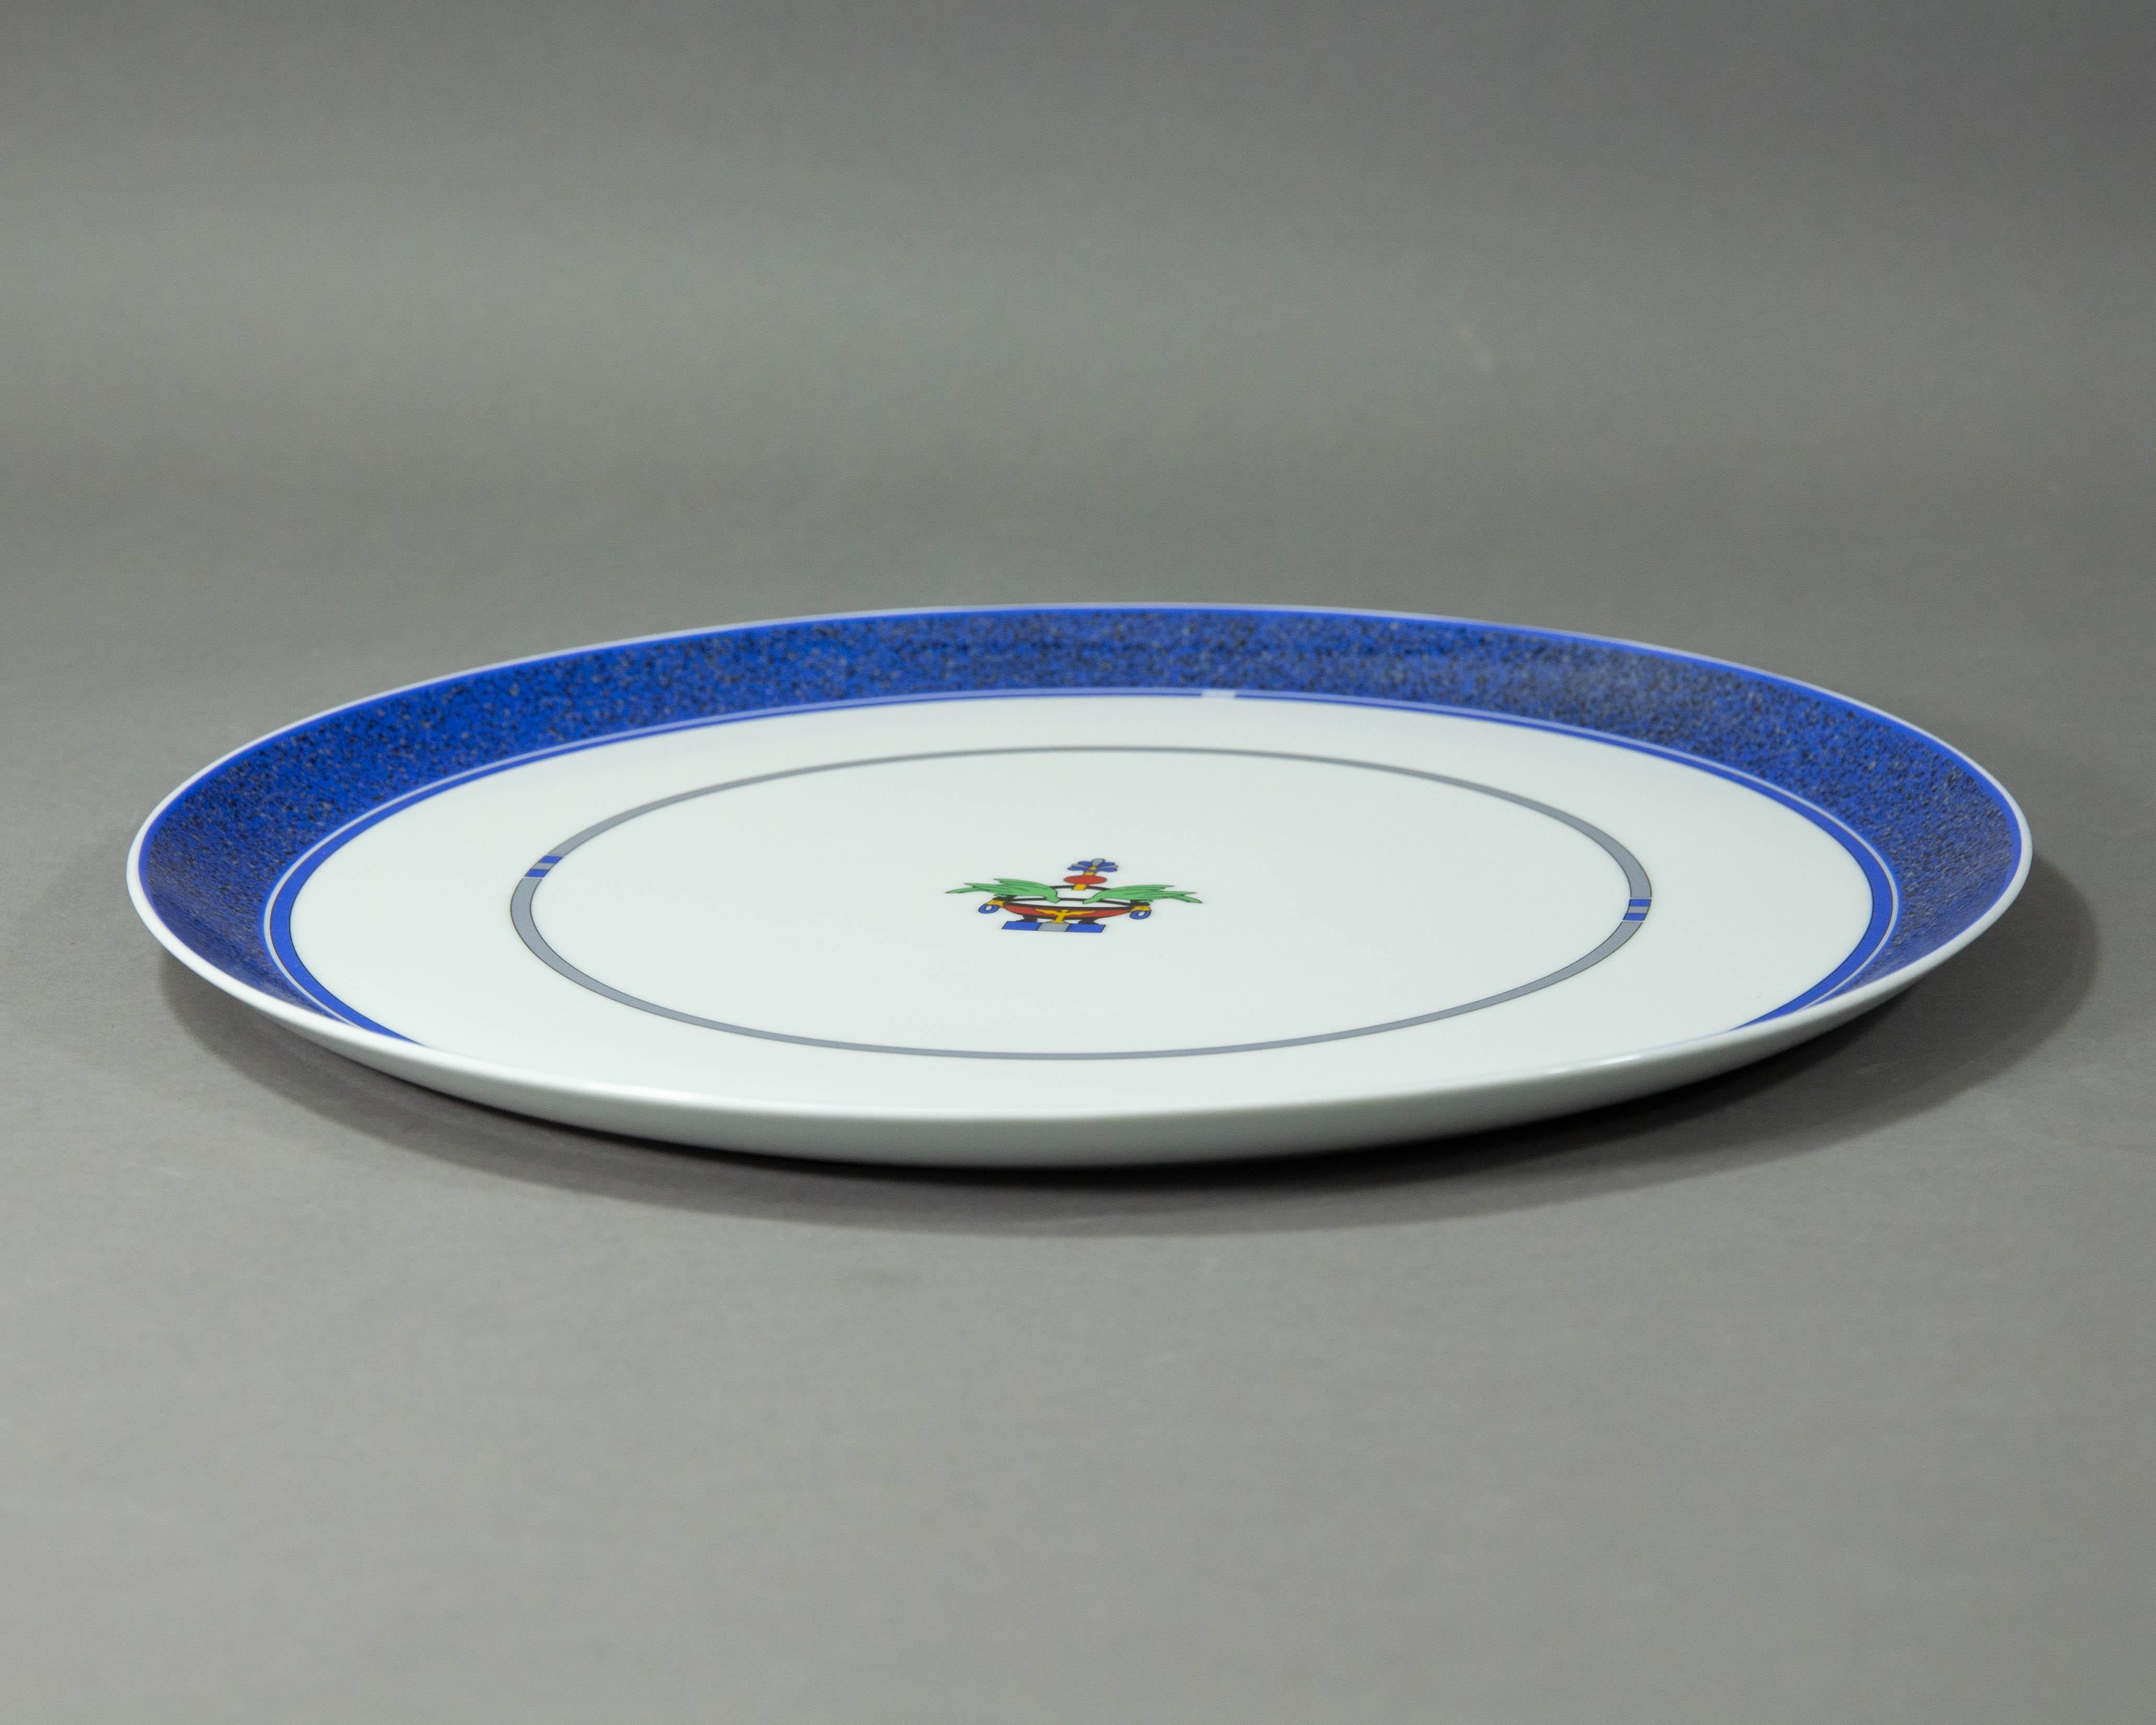 A Cartier Venetienne round serving platter.

The porcelain serving platter was made in Limoges for Cartier La Maison in 1989, the decoration is called 'Venetienne'.

The luxury jeweller and watchmaker Cartier made a range of high end housewares